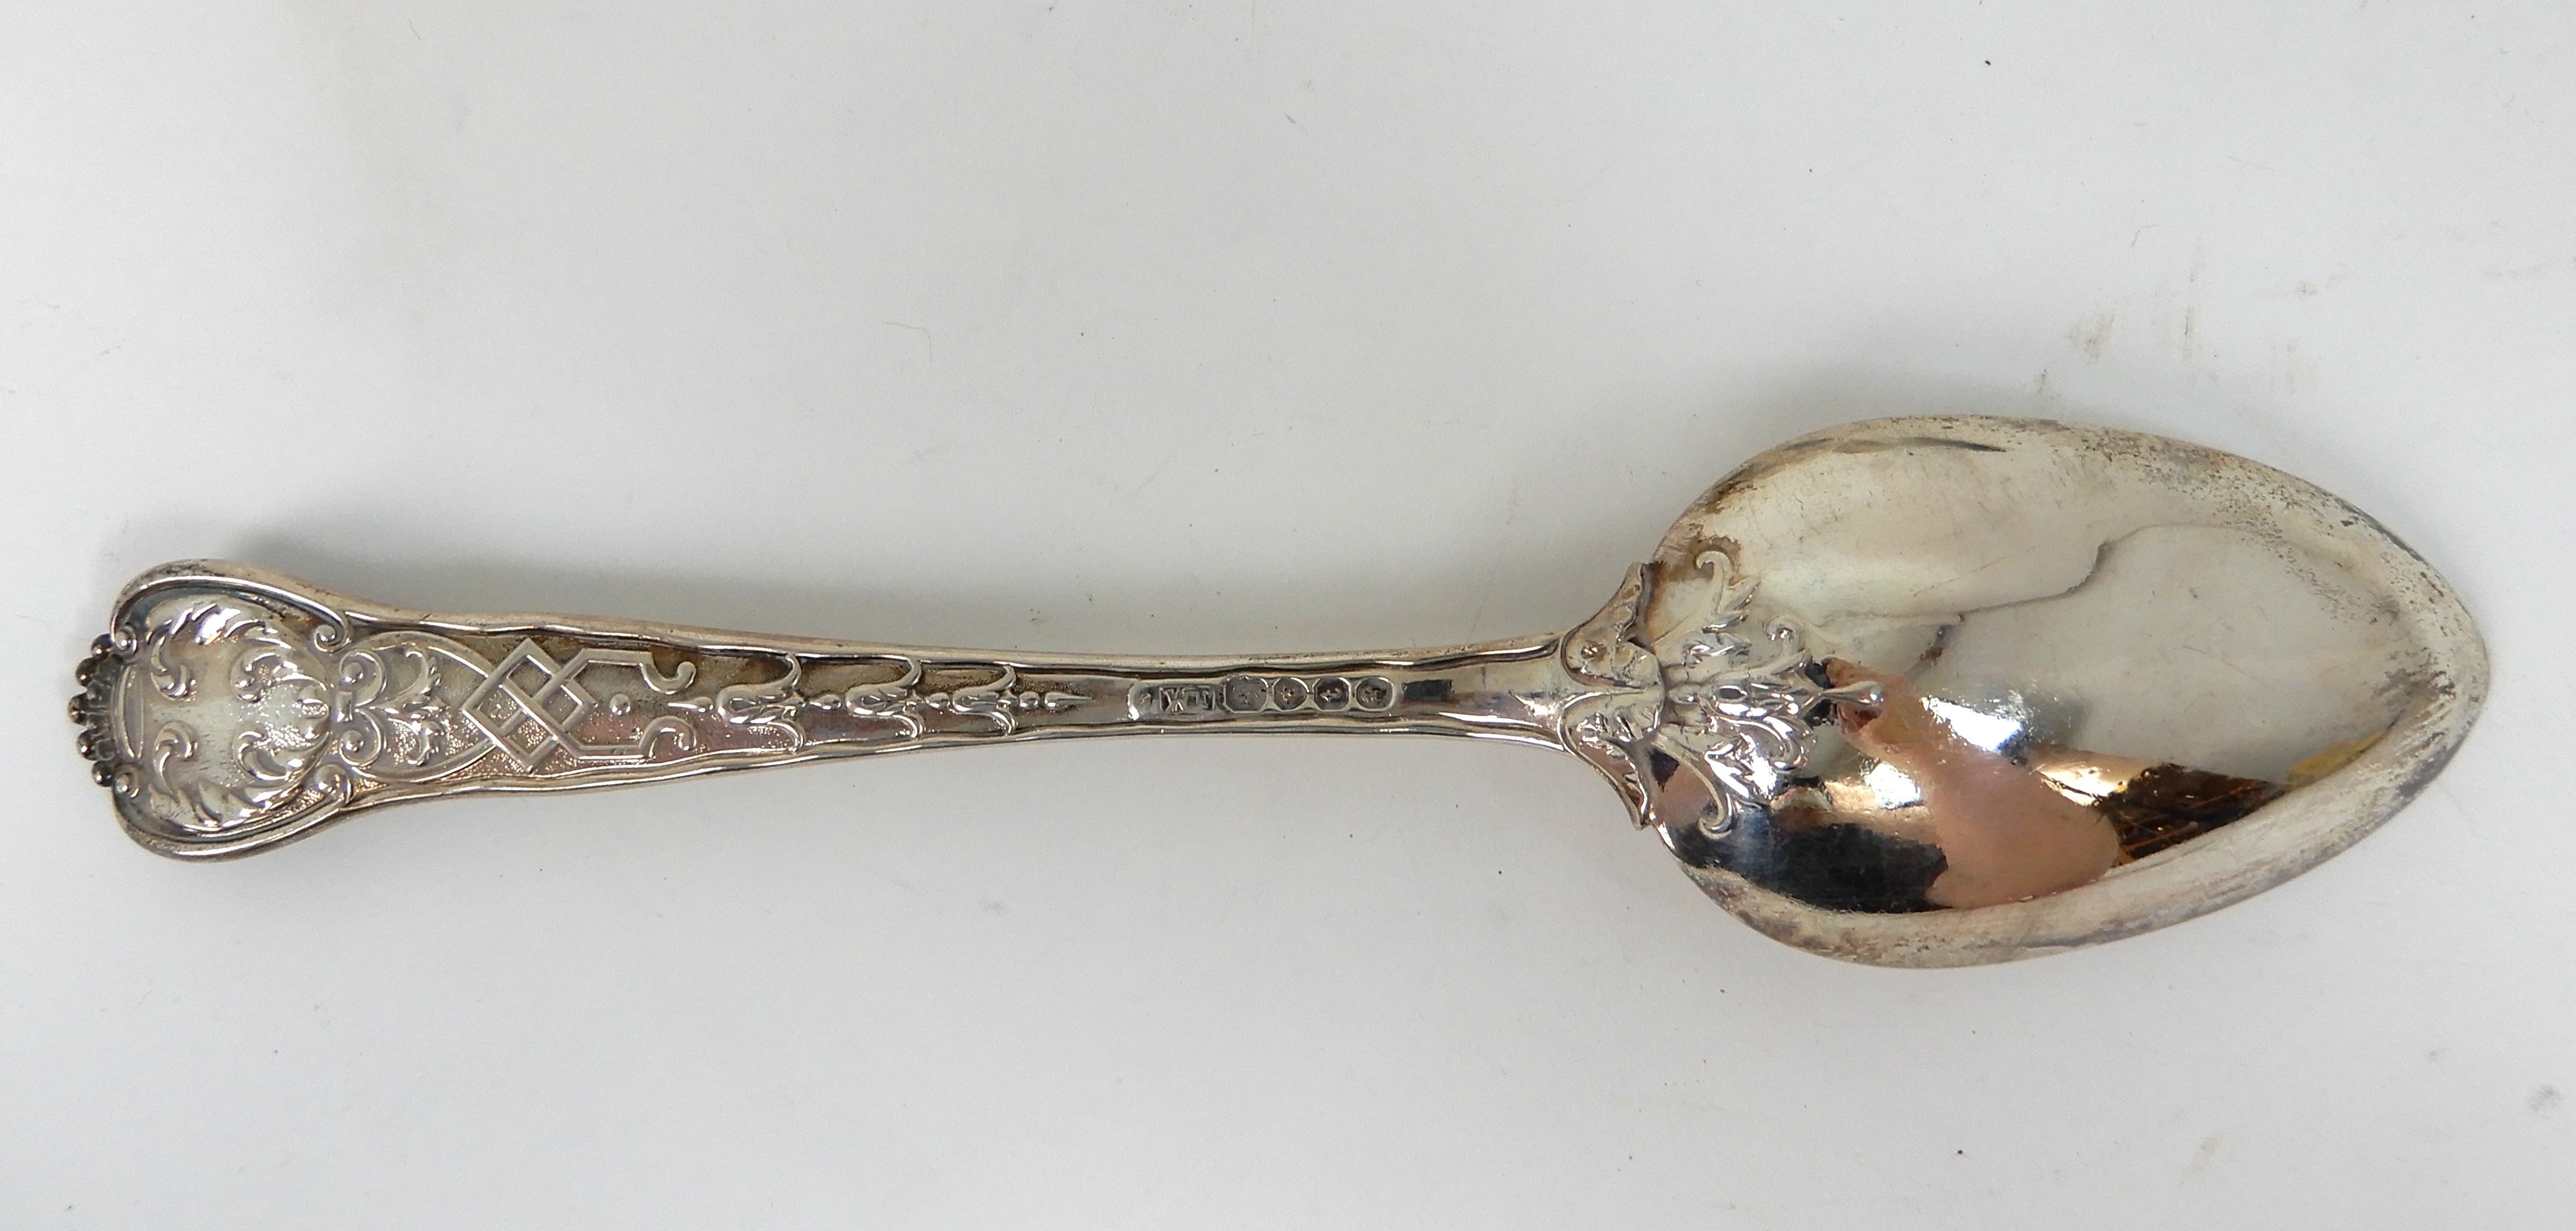 A SET OF SIX SILVER TABLESPOONS by William Theobold, London 1834, with ornately decorated stems, - Image 5 of 6